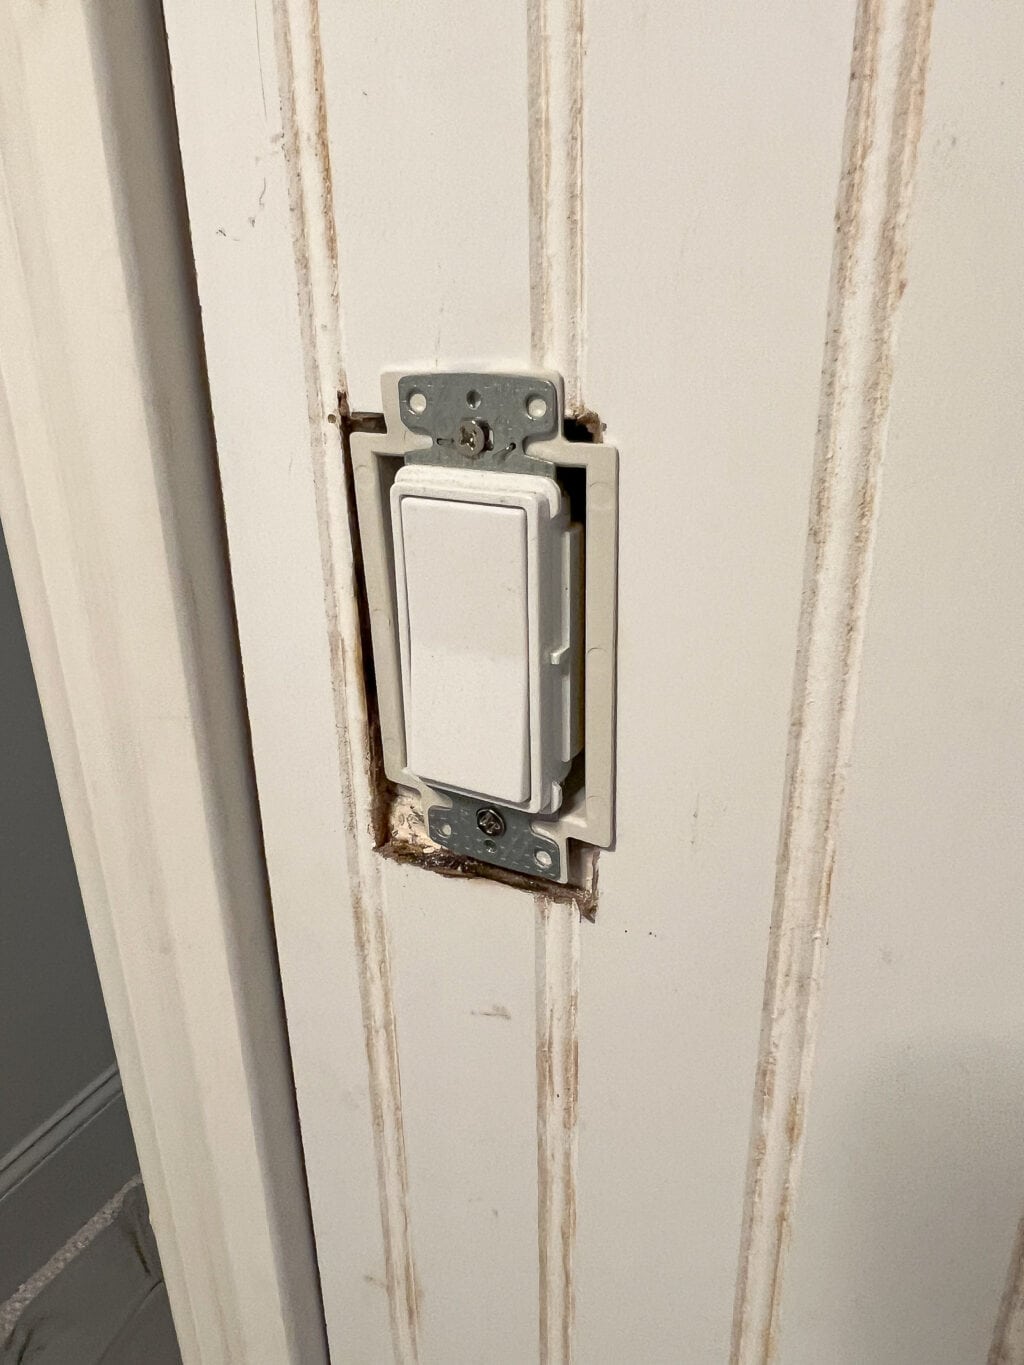 Outlet box extender 